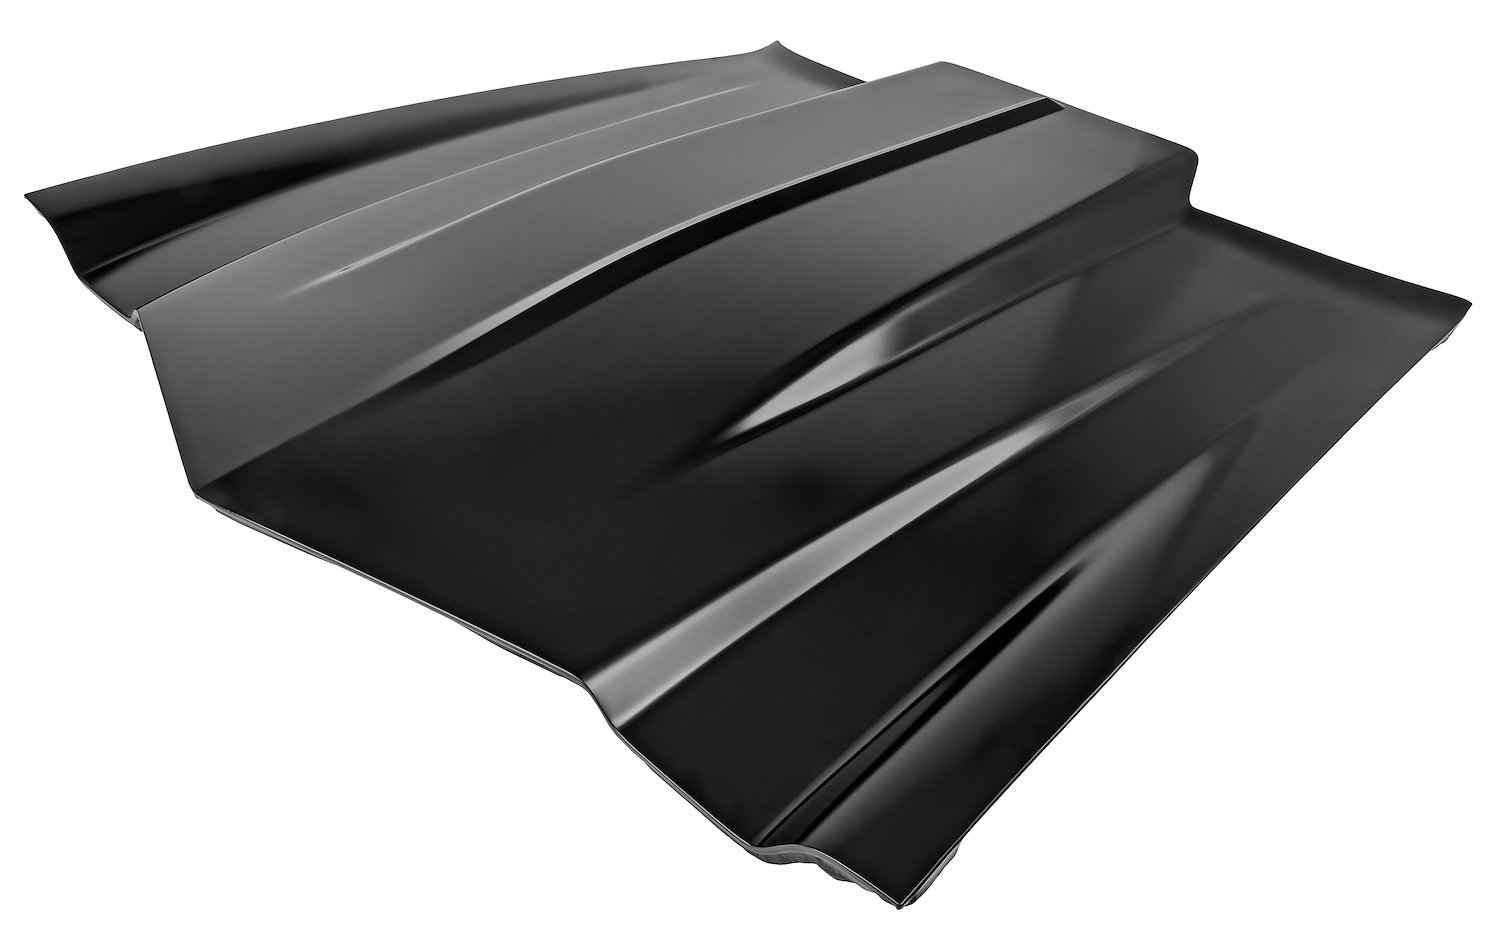 Steel Cowl Induction Hood for 1970-1981 Chevrolet Camaro